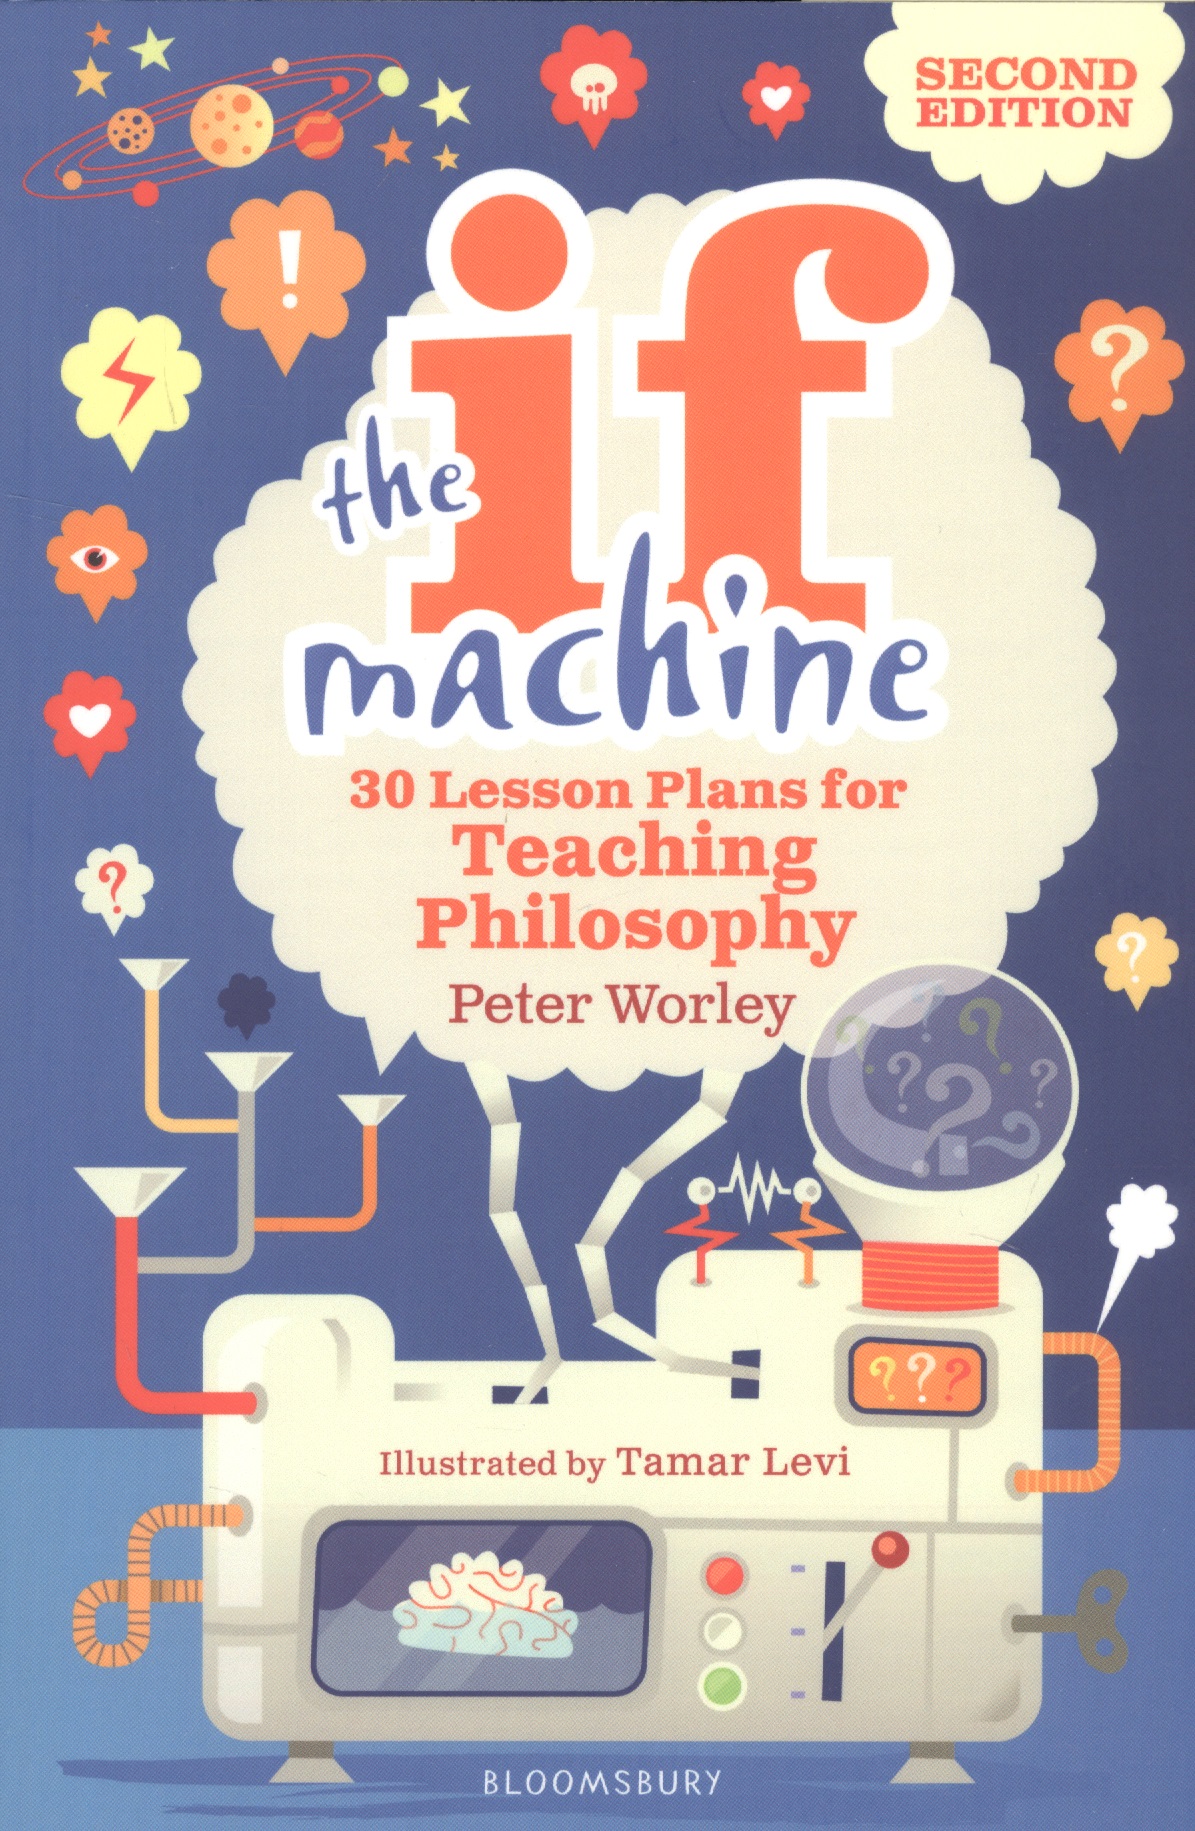 the bed of procrustes philosophical and practical aphorisms Worley Peter The If Machine. 30 Lesson Plans for Teaching Philosophy